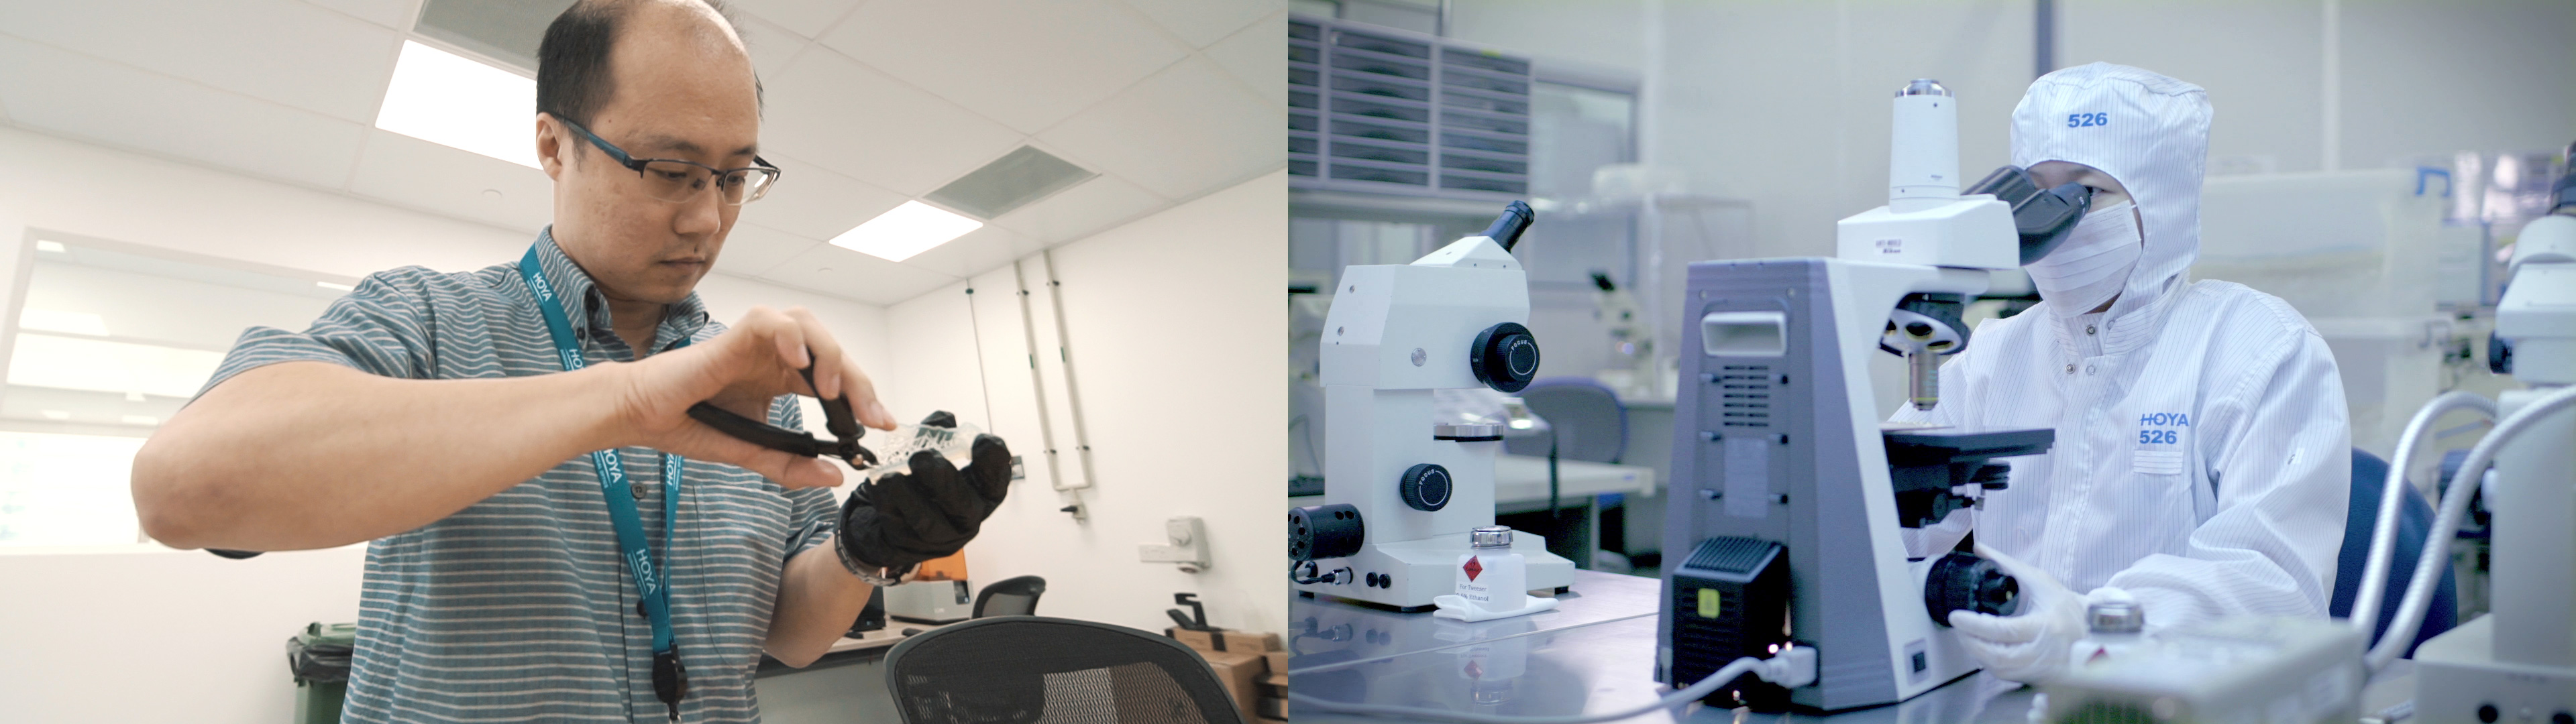 Left, man works on transparent object with pliers, right, staff in lab coat looking into microscope